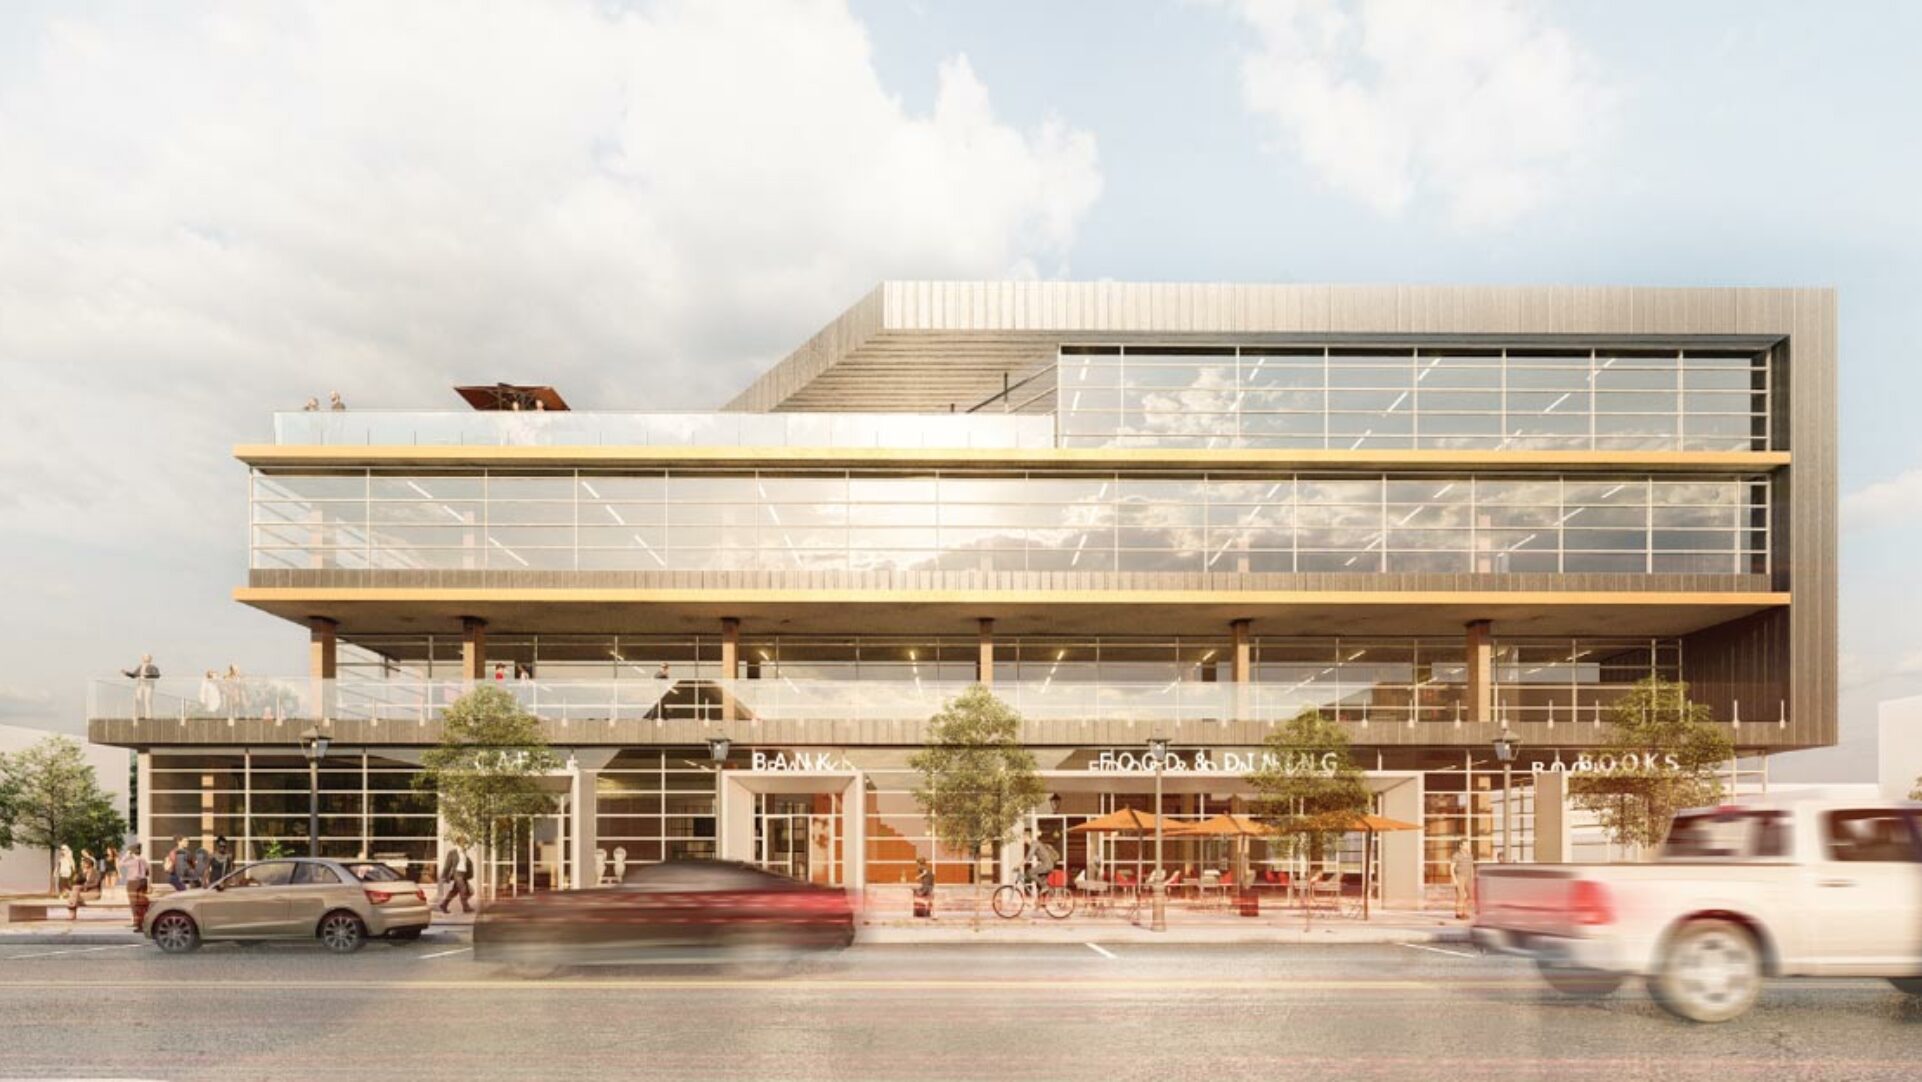 Exterior rendering of the Crossroads Knowledge Center mixed-use education and office facility